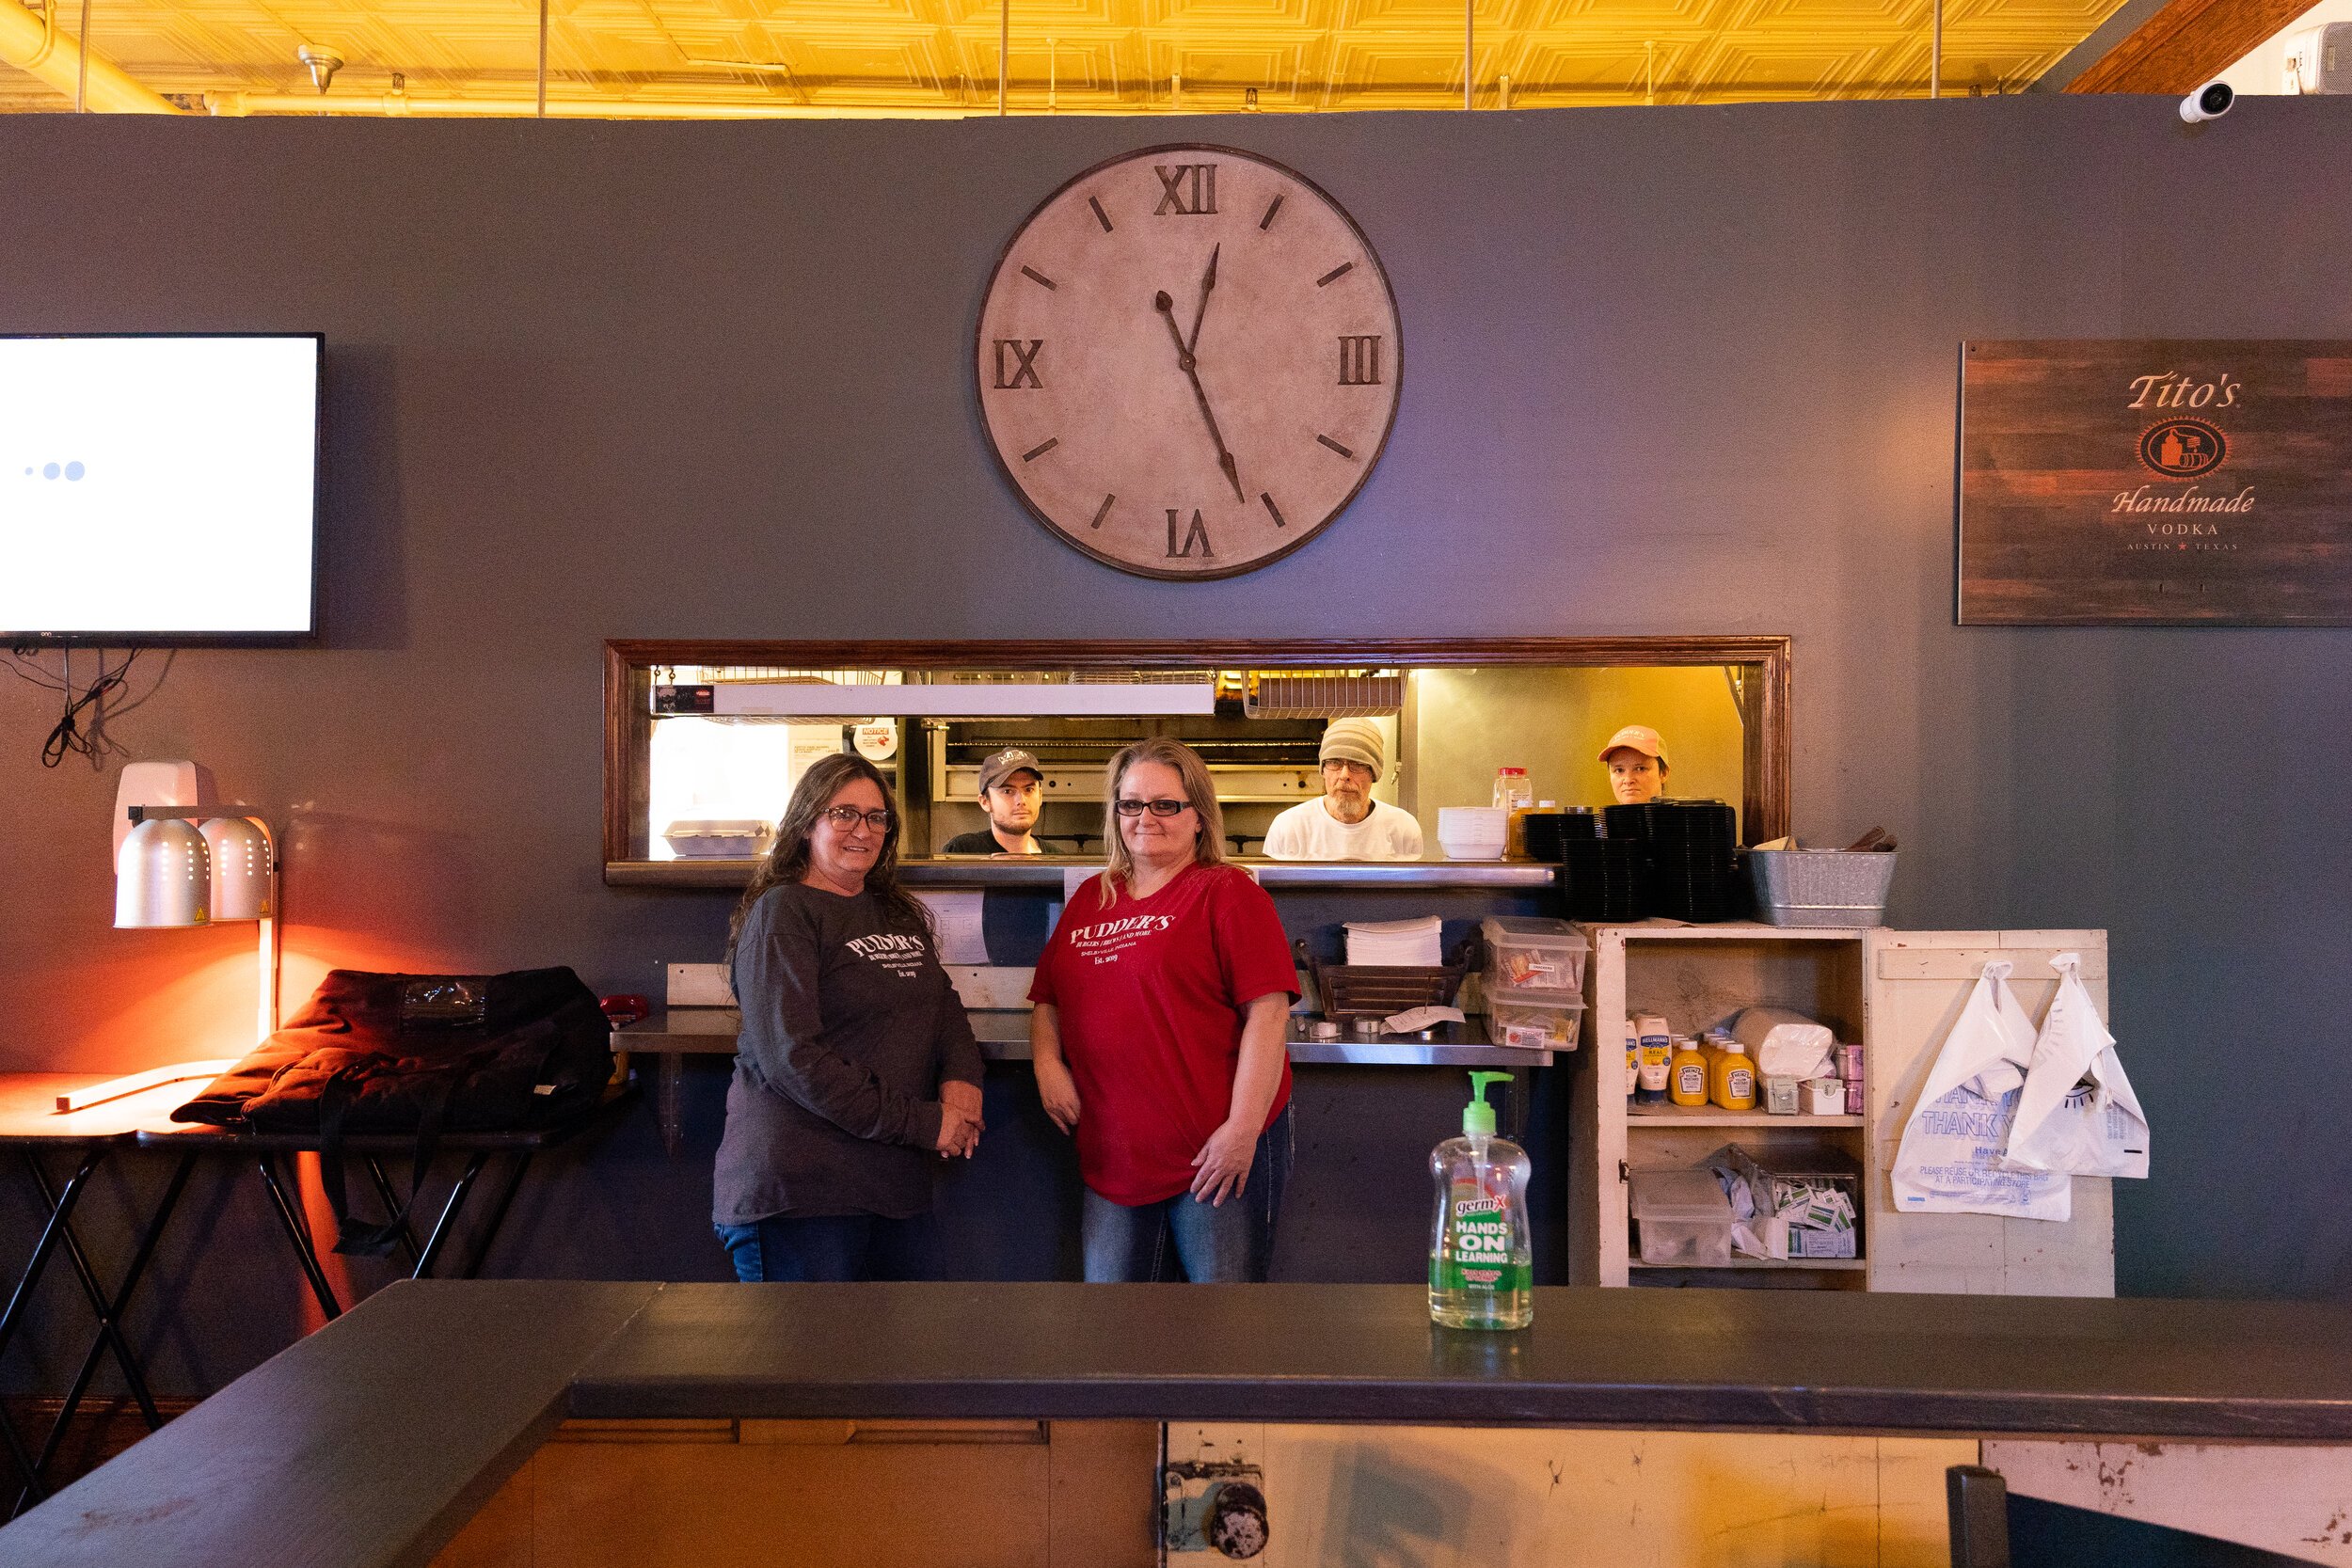  “There are a lot of restaurants around here still going strong, there’s a lot of supportive people in this community who want to see their favorite places stay open.” - Pudder’s Restaurant Team | 04/03/20 (Shelbyville, IN) 